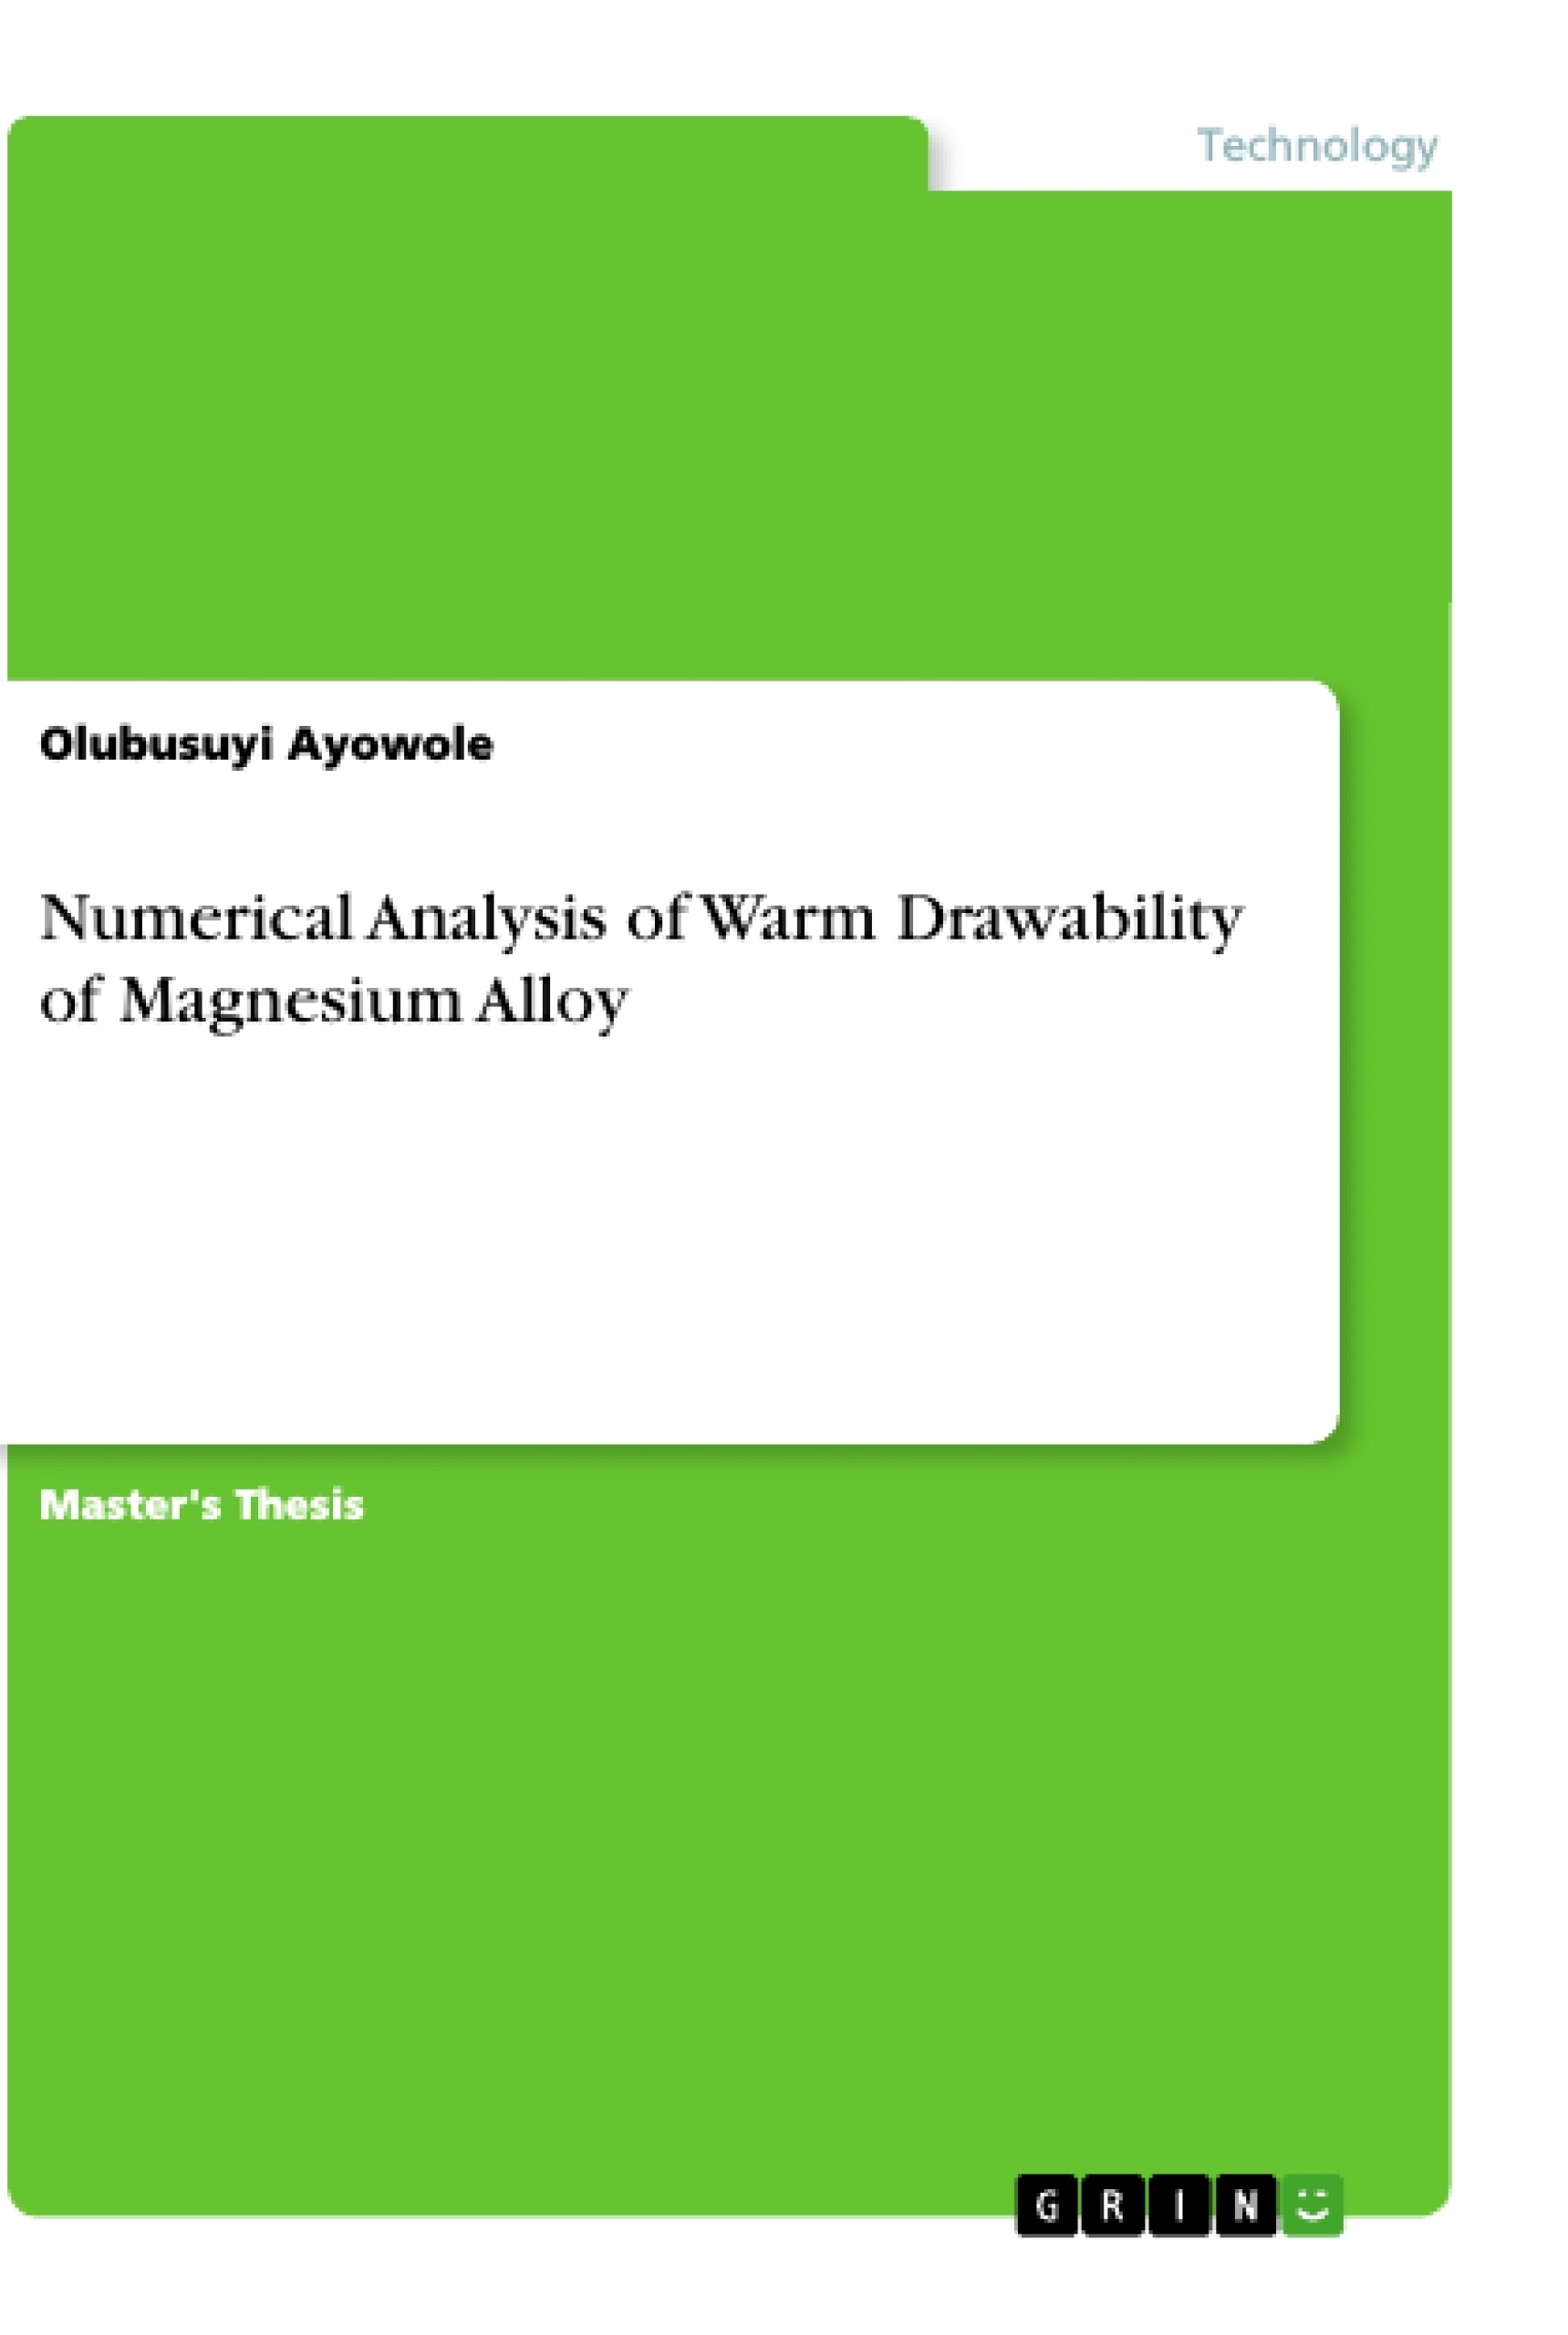 Title: Numerical Analysis of Warm Drawability of Magnesium Alloy